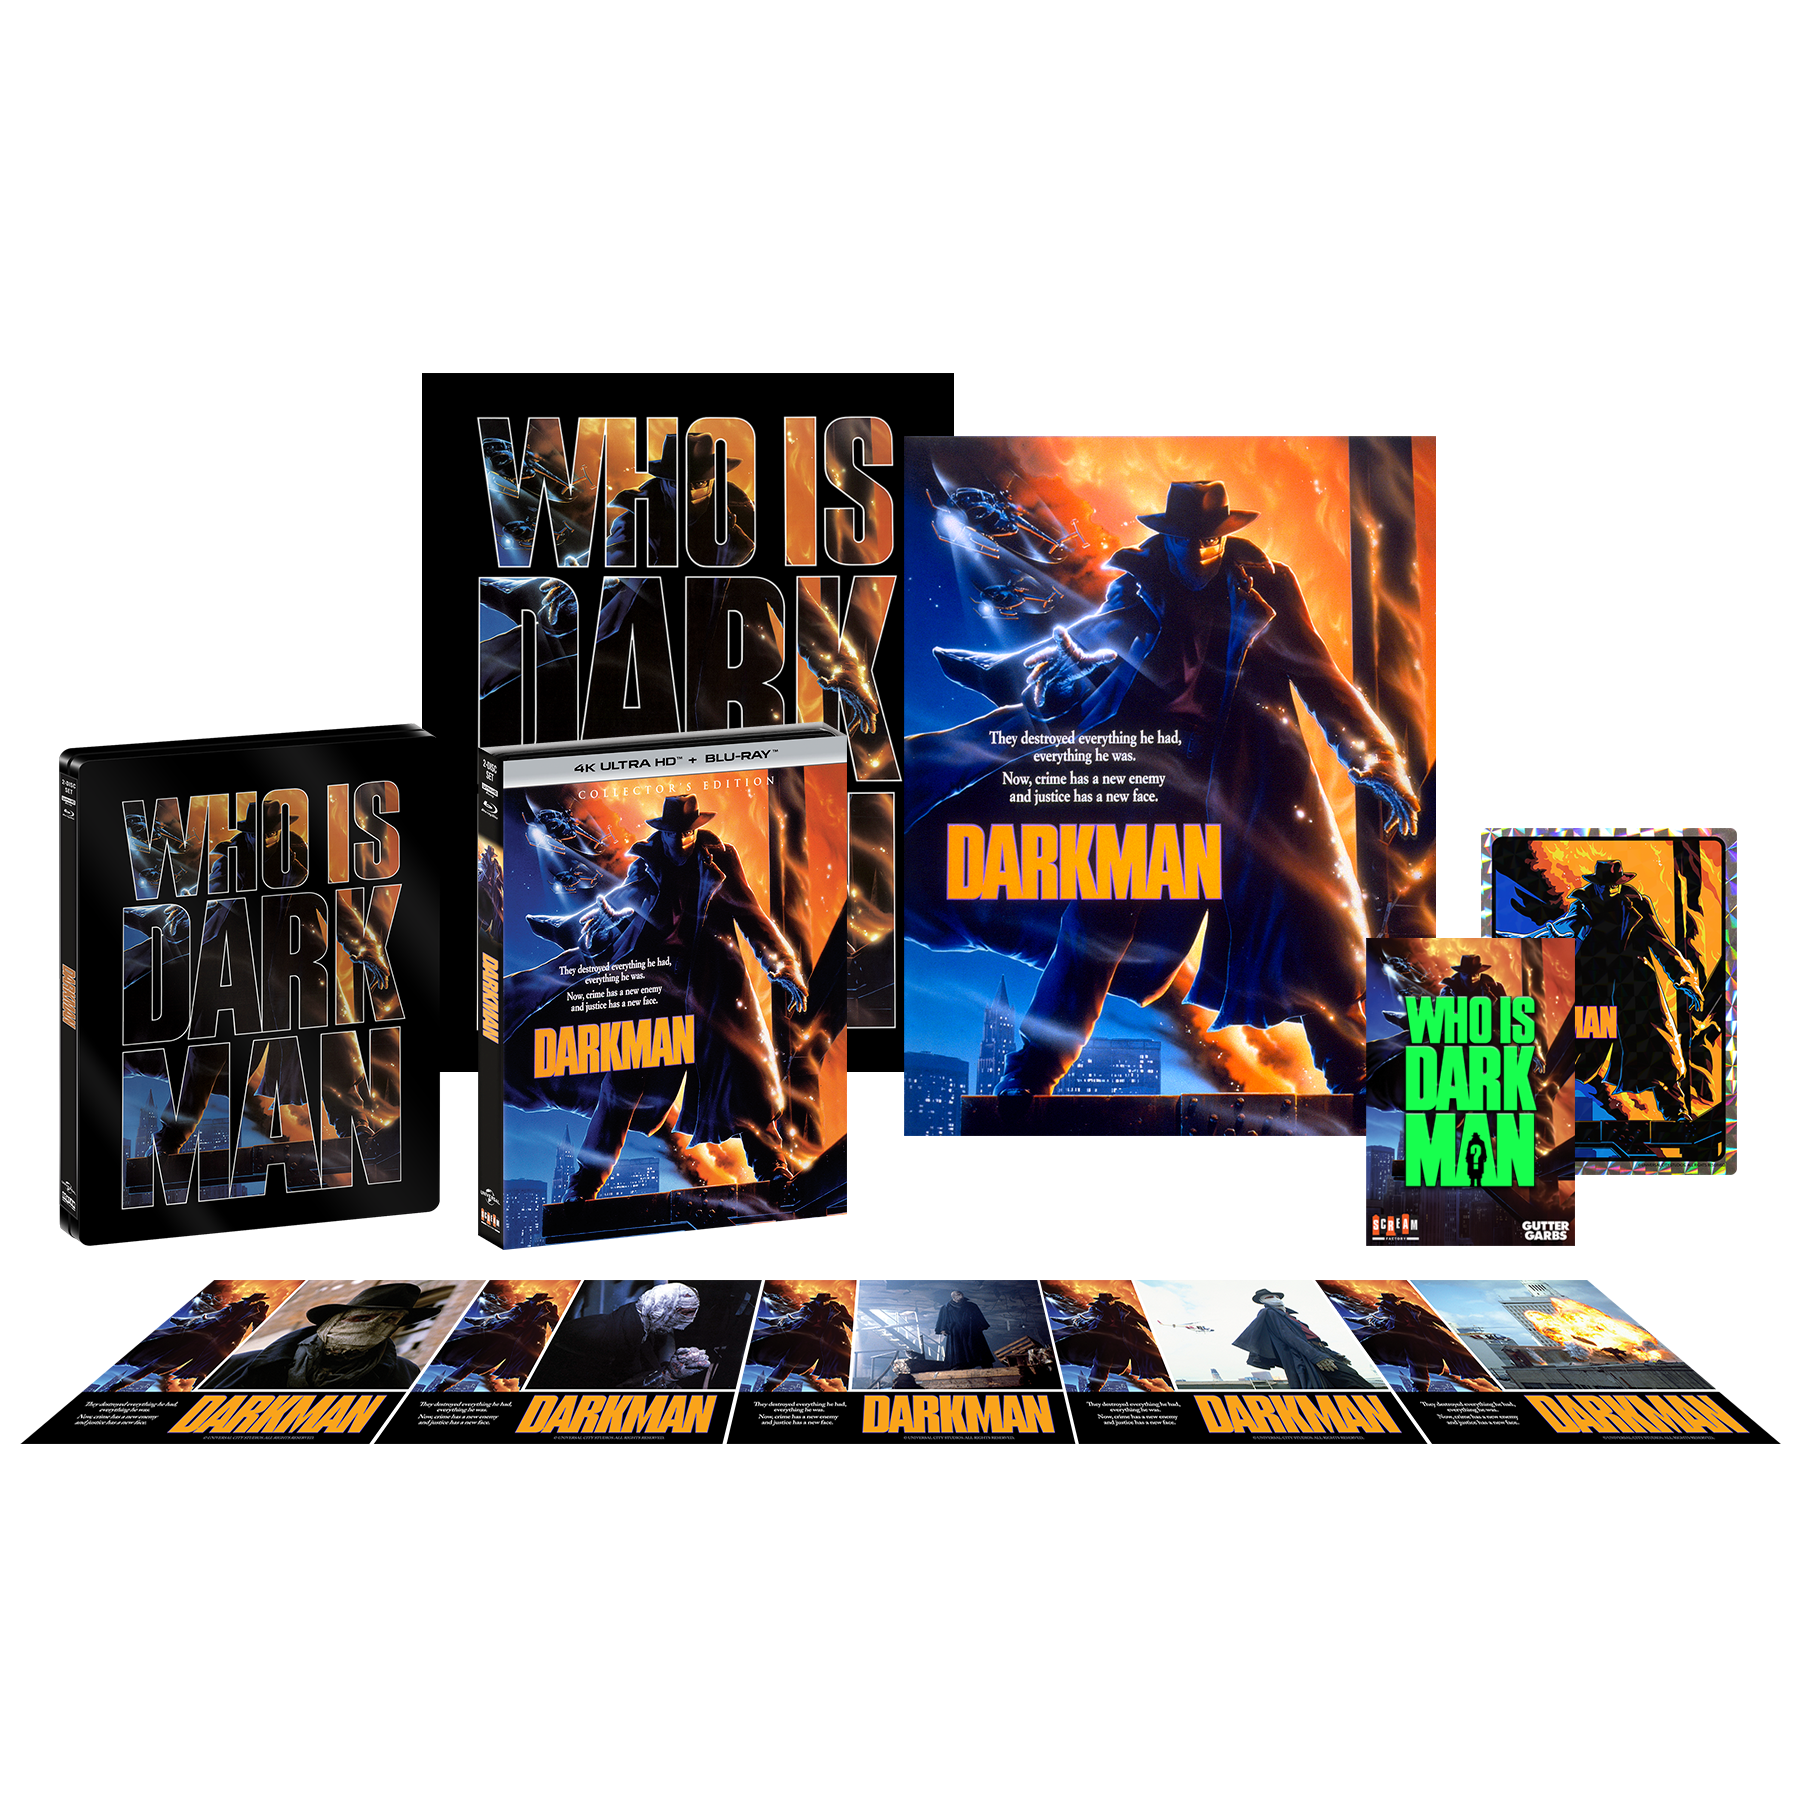 Darkman [Collector's Edition] + [Limited Edition Steelbook] + Pin + Prism Sticker + 2 Posters + Lobby Cards - Shout! Factory